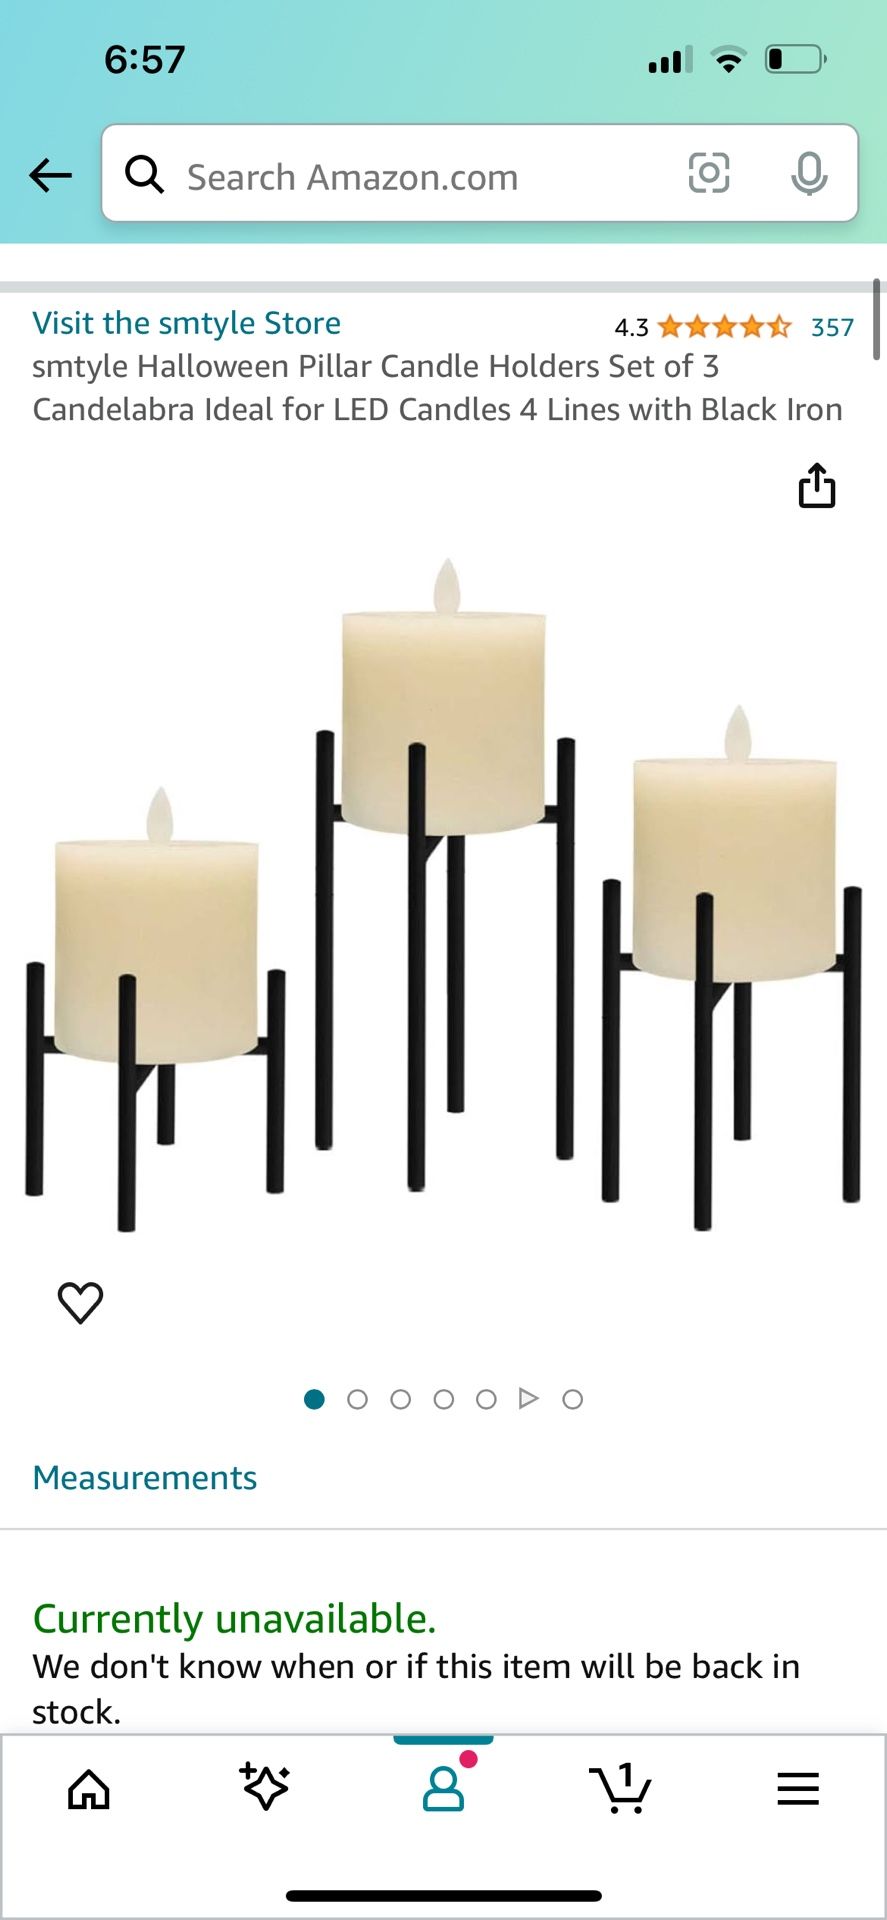 3x Pillar Candle Holders Set of 3 Candelabra Ideal for LED Candles 4 Lines with Black Iron